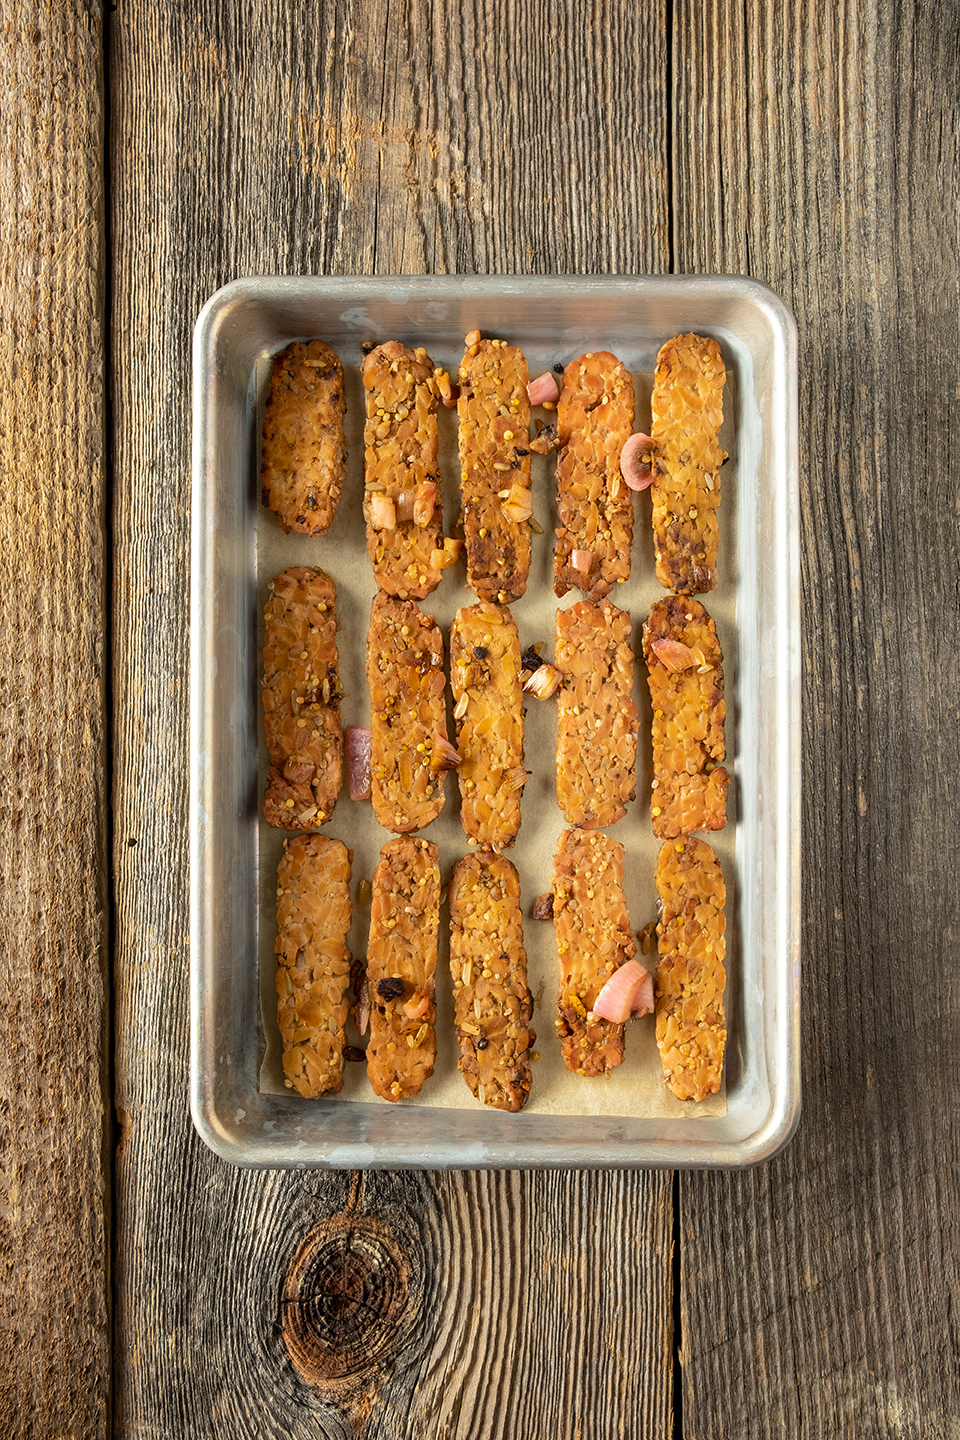  Cooked tempeh in a baking sheet lined with parchment paper on a rustic wooden background.  